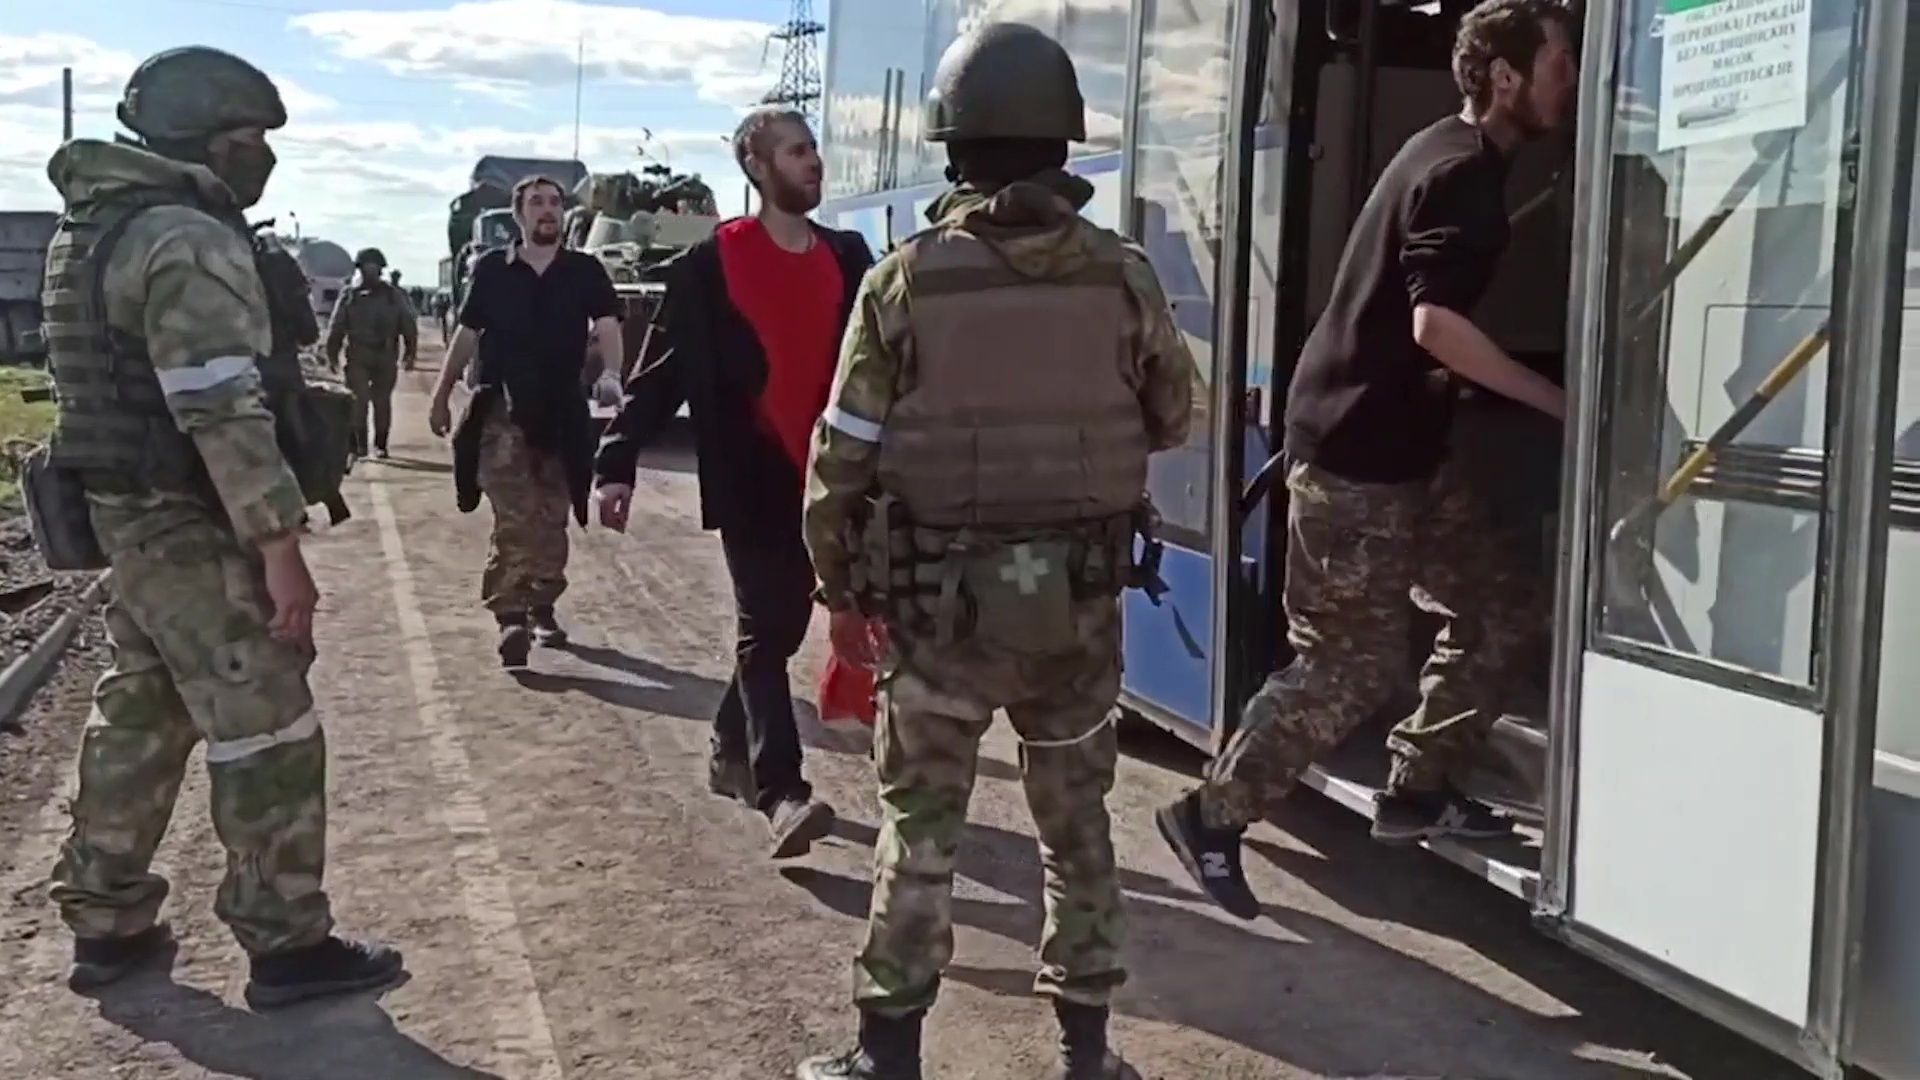 A screenshot taken from a video released by the Russian Defense Ministry shows Ukrainian soldiers being evacuated from Azovstal steel plant on Tuesday.